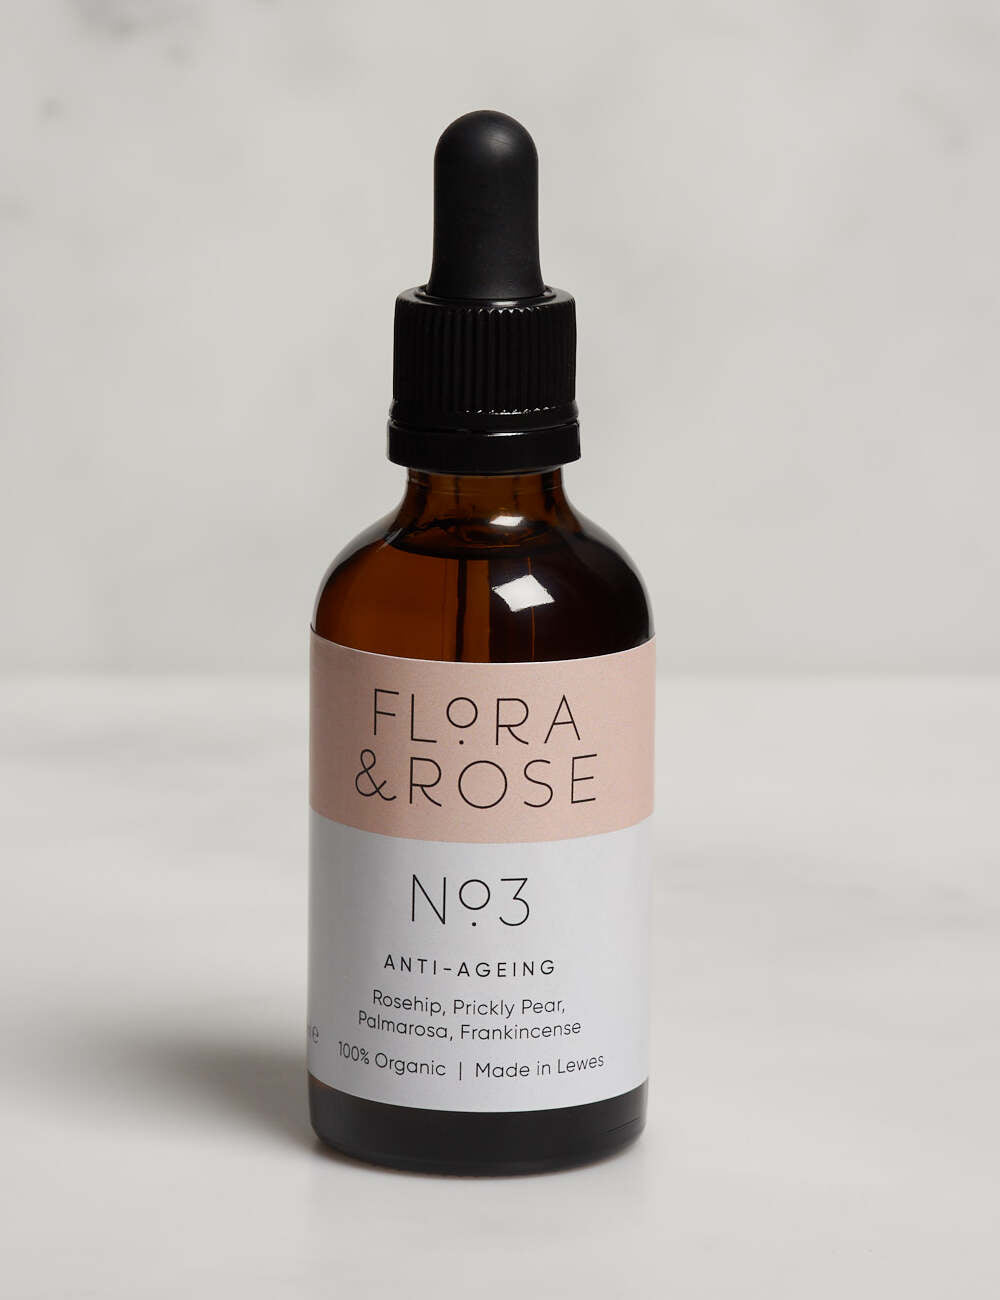 No. 3 Anti-Ageing Face Oil